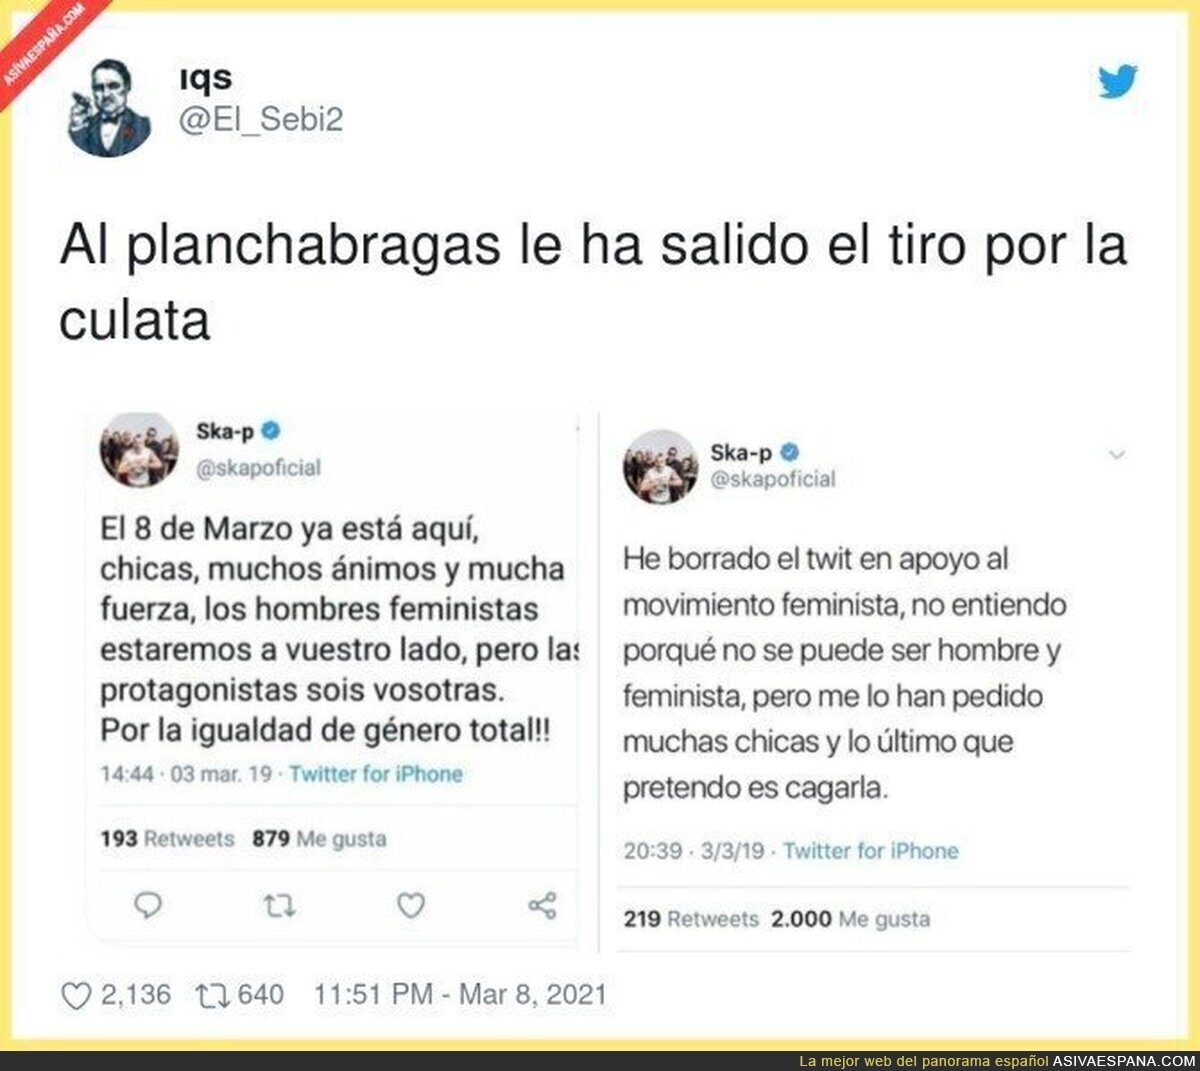 MUJERES, ME GUSTÁIS